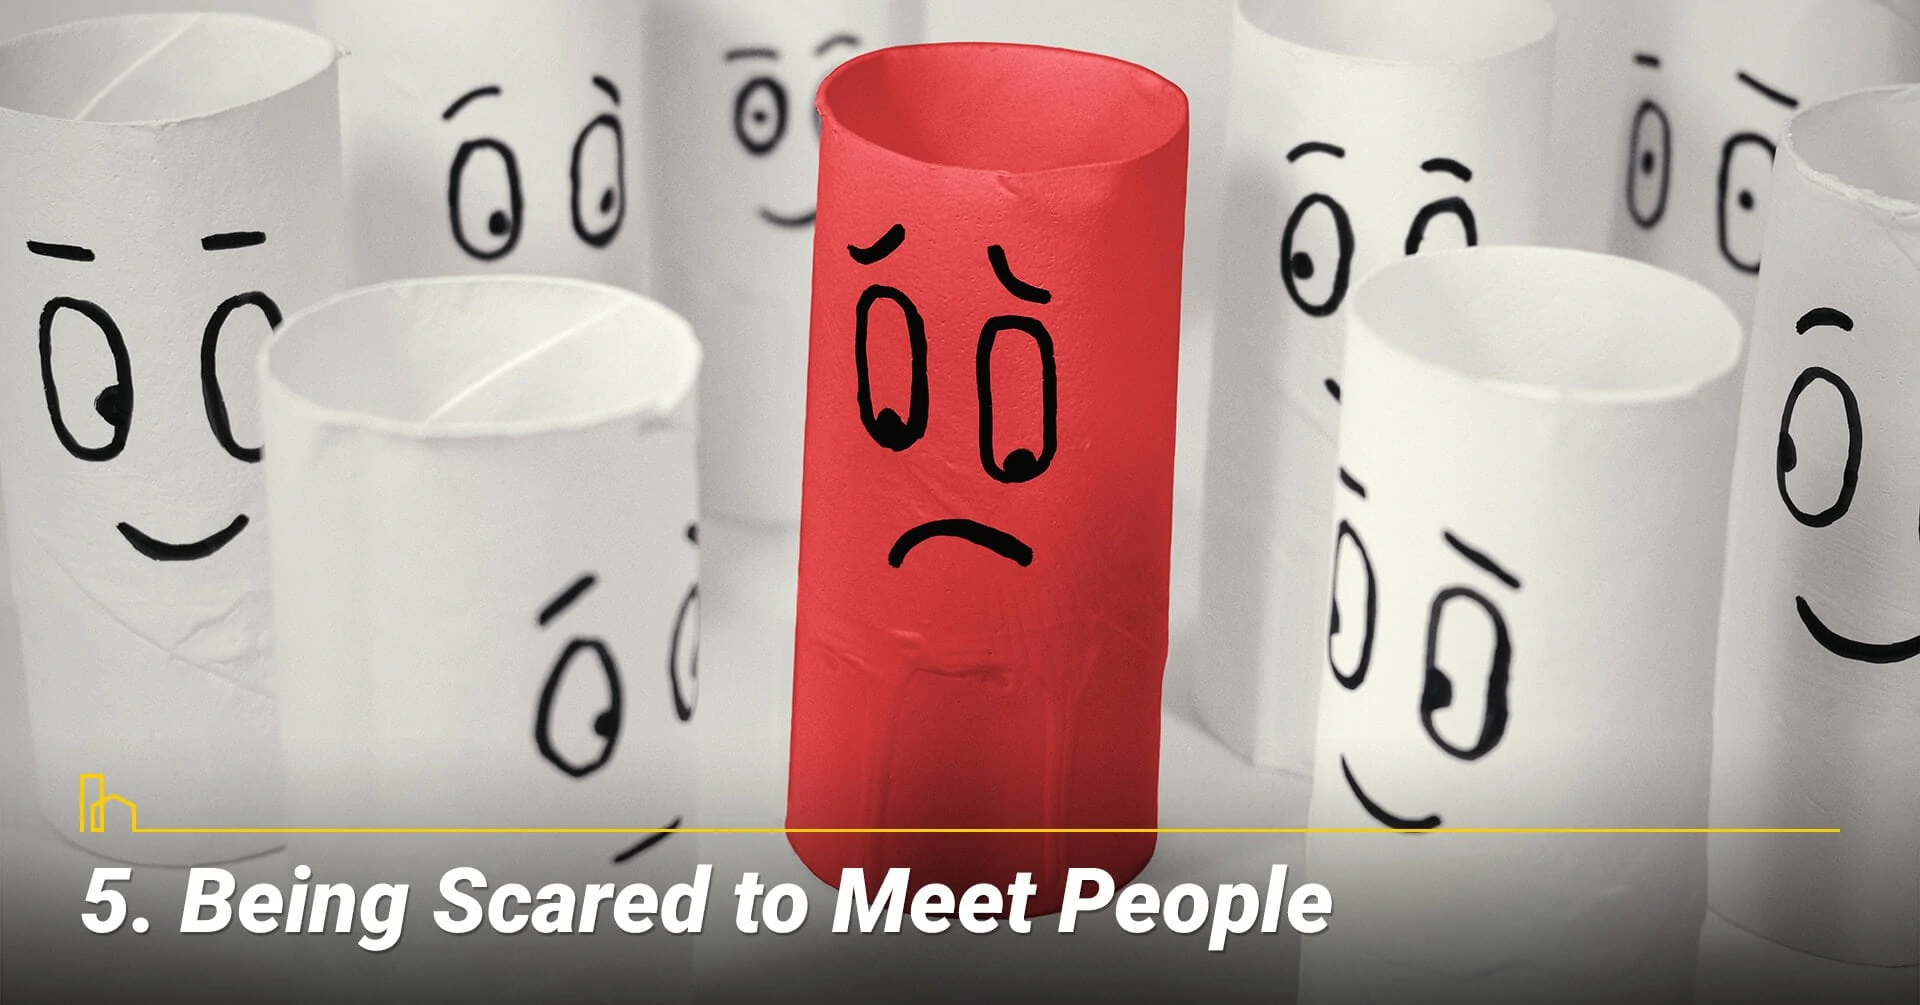 Being Scared to Meet People, work on your social skills